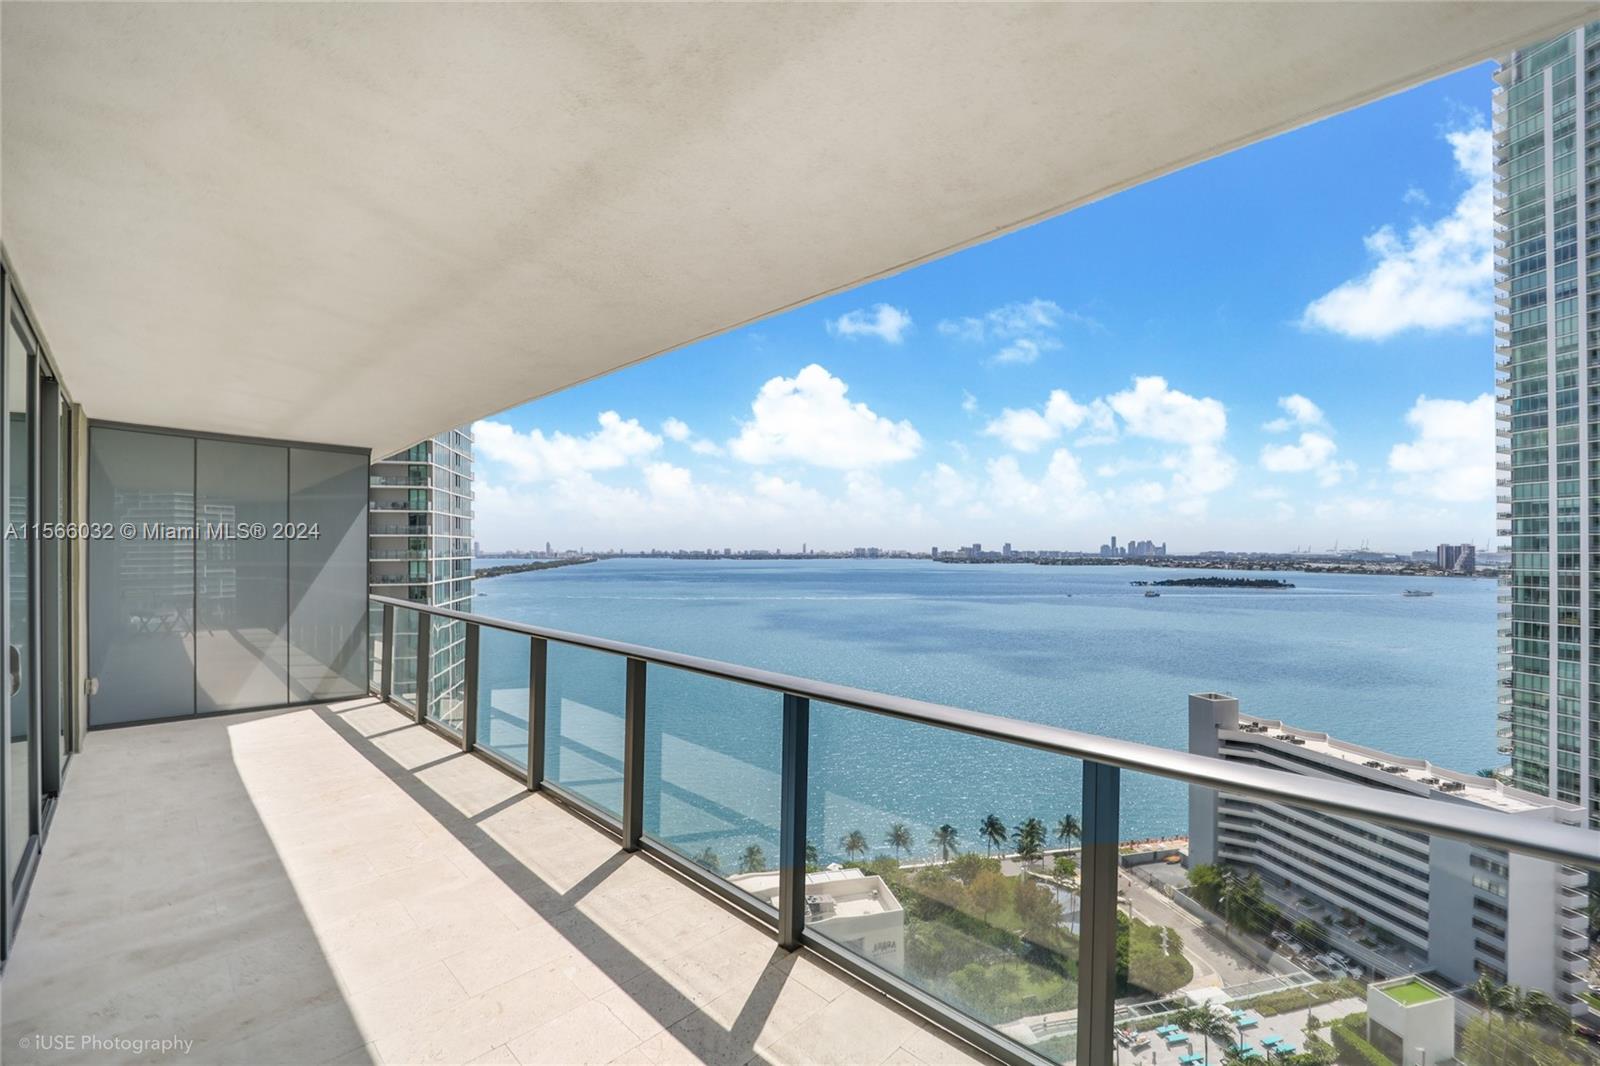 Experience luxury living in this exquisite corner three-bedroom plus den, 3.5-bathroom condo on the 21st floor of Paraiso Bay in Edgewater. With its soaring ceilings and abundant natural light, this residence offers a spacious and inviting ambiance. Enjoy the breathtaking water and city views from two balconies. The open kitchen, den, and oversized walk-in closets add to the functionality and comfort of this home. Beyond the residence, Paraiso Bay boasts five-star amenities, including a theater, billiard room, resort-style pools, fitness center, bowling alley, and tennis courts. Whether you seek relaxation or recreation, this high-rise gem caters to every lifestyle need. Take advantage of the opportunity to indulge in unparalleled elegance and sophistication at Paraiso Bay.